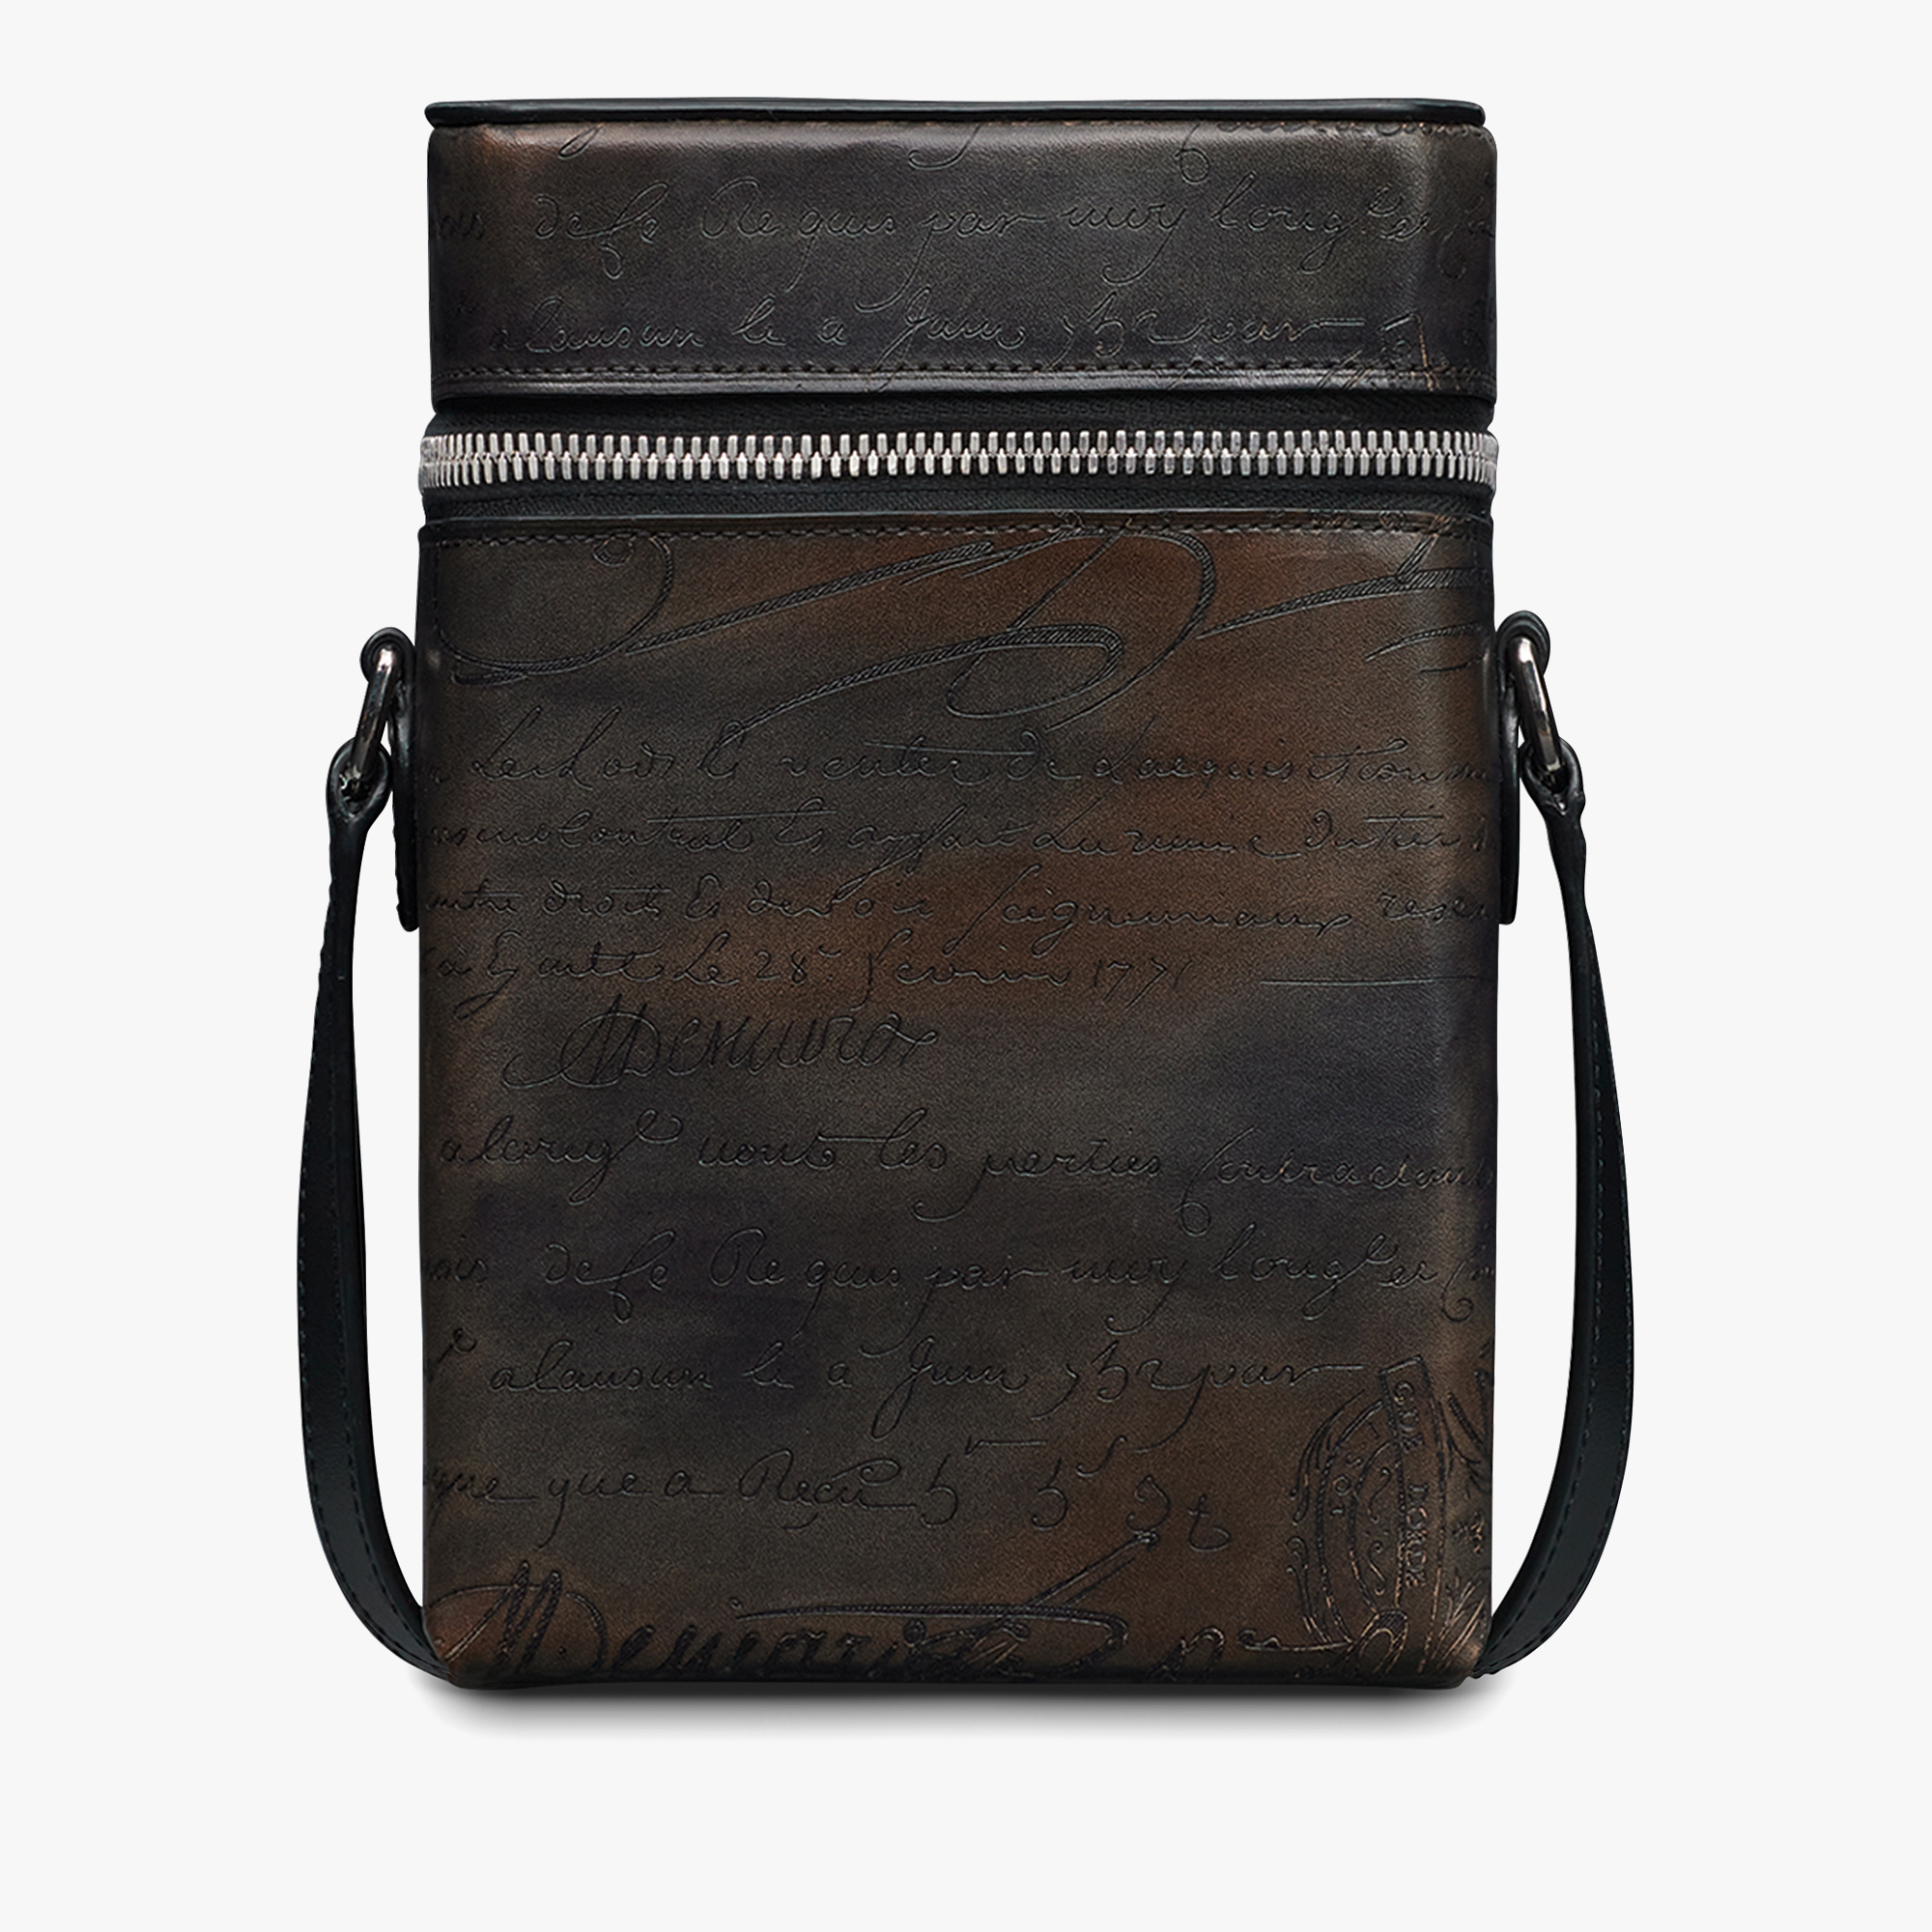 Free Scritto Leather Messenger, CHARCOAL BROWN, hi-res